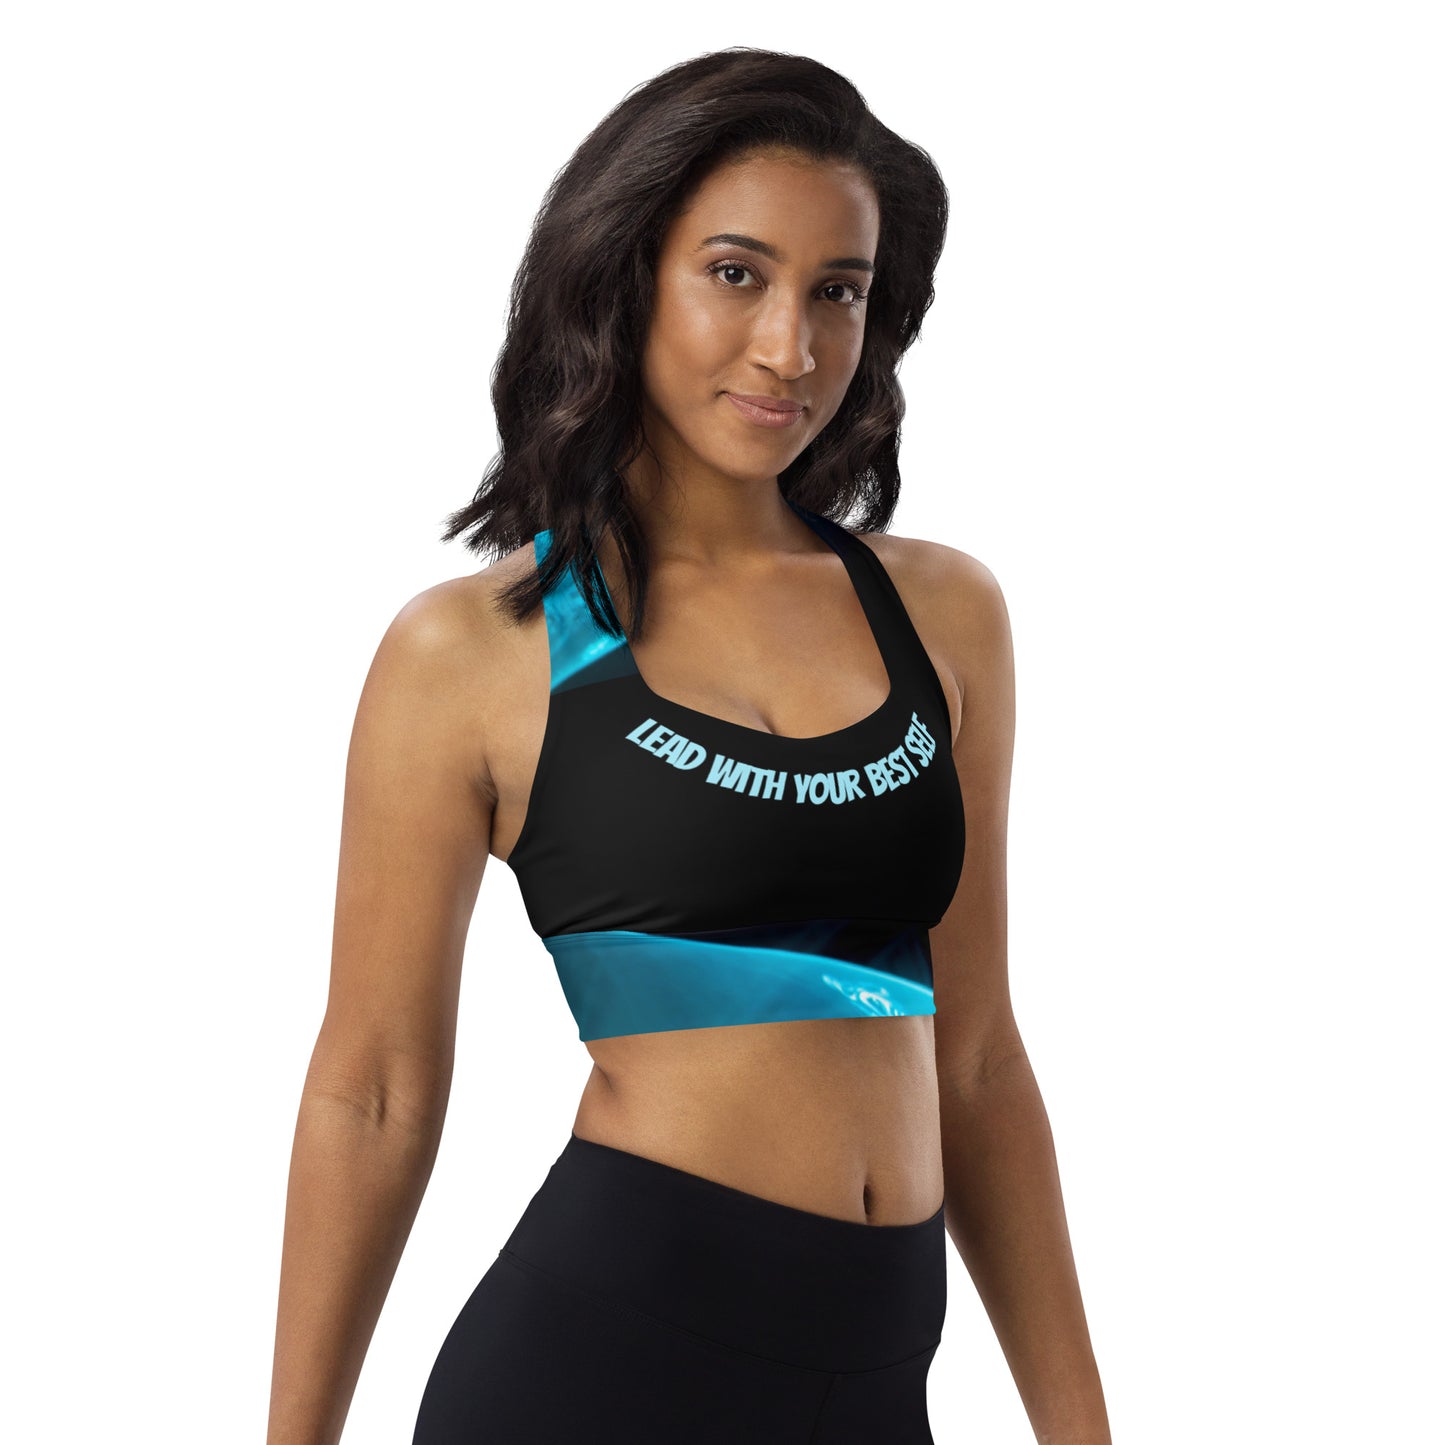 Artists, it’s not enough to want it; you have to be it.  Set your trajectory towards the spotlight in SpotlYght Seeker’s Aqua SpotlYght Sports Bra - Dress where you want to be SpotlYght Seeker.